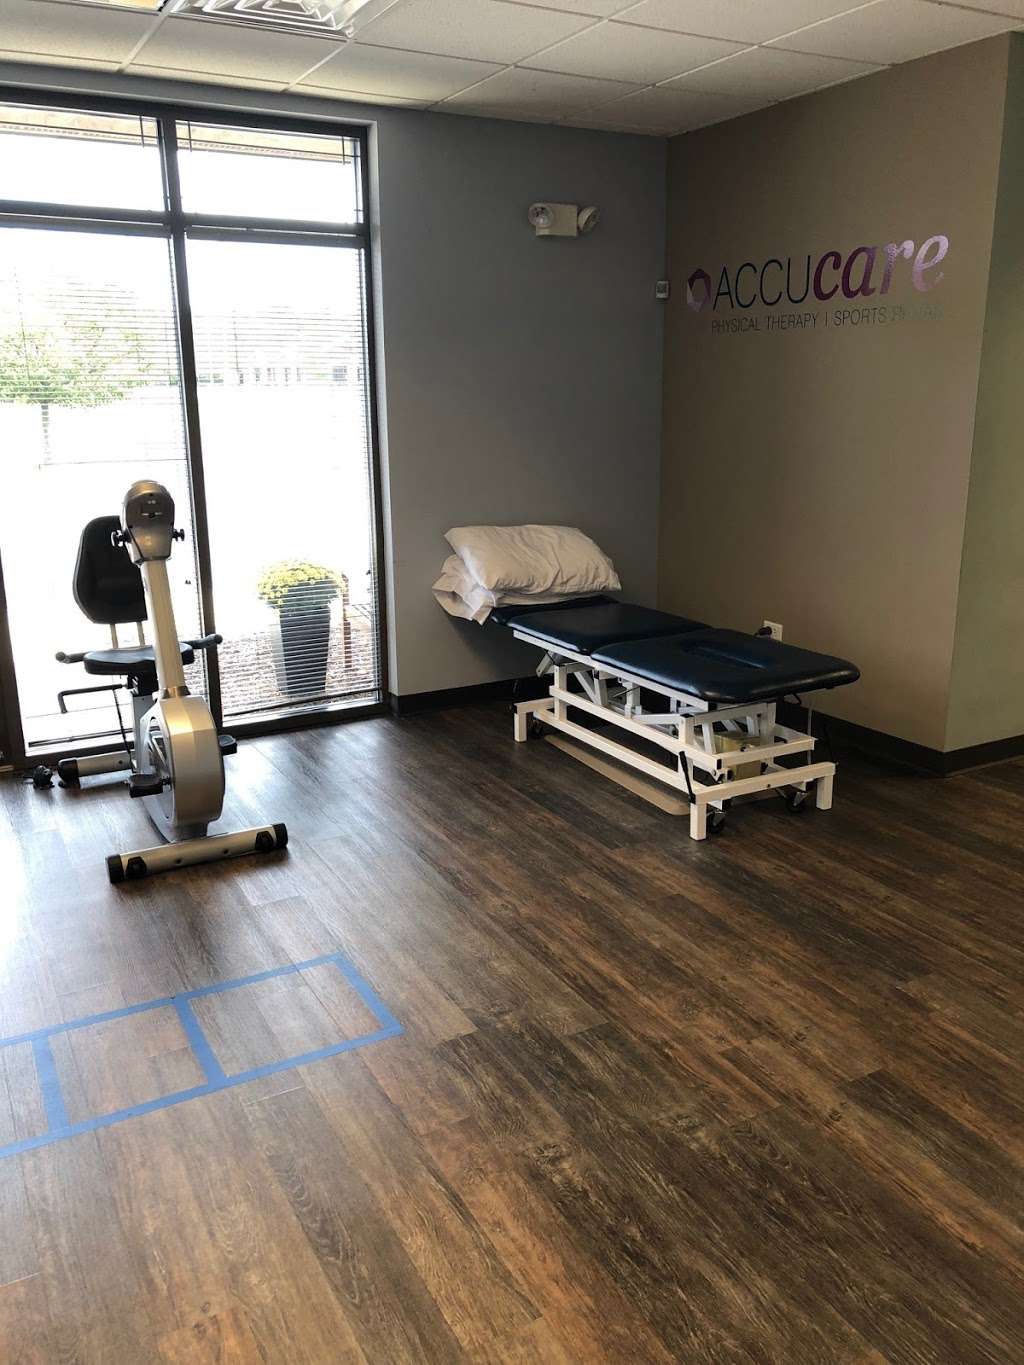 AccuCare Physical Therapy | Sports Rehab | 1001 E Wilson St STE 100, Batavia, IL 60510 | Phone: (630) 761-0900